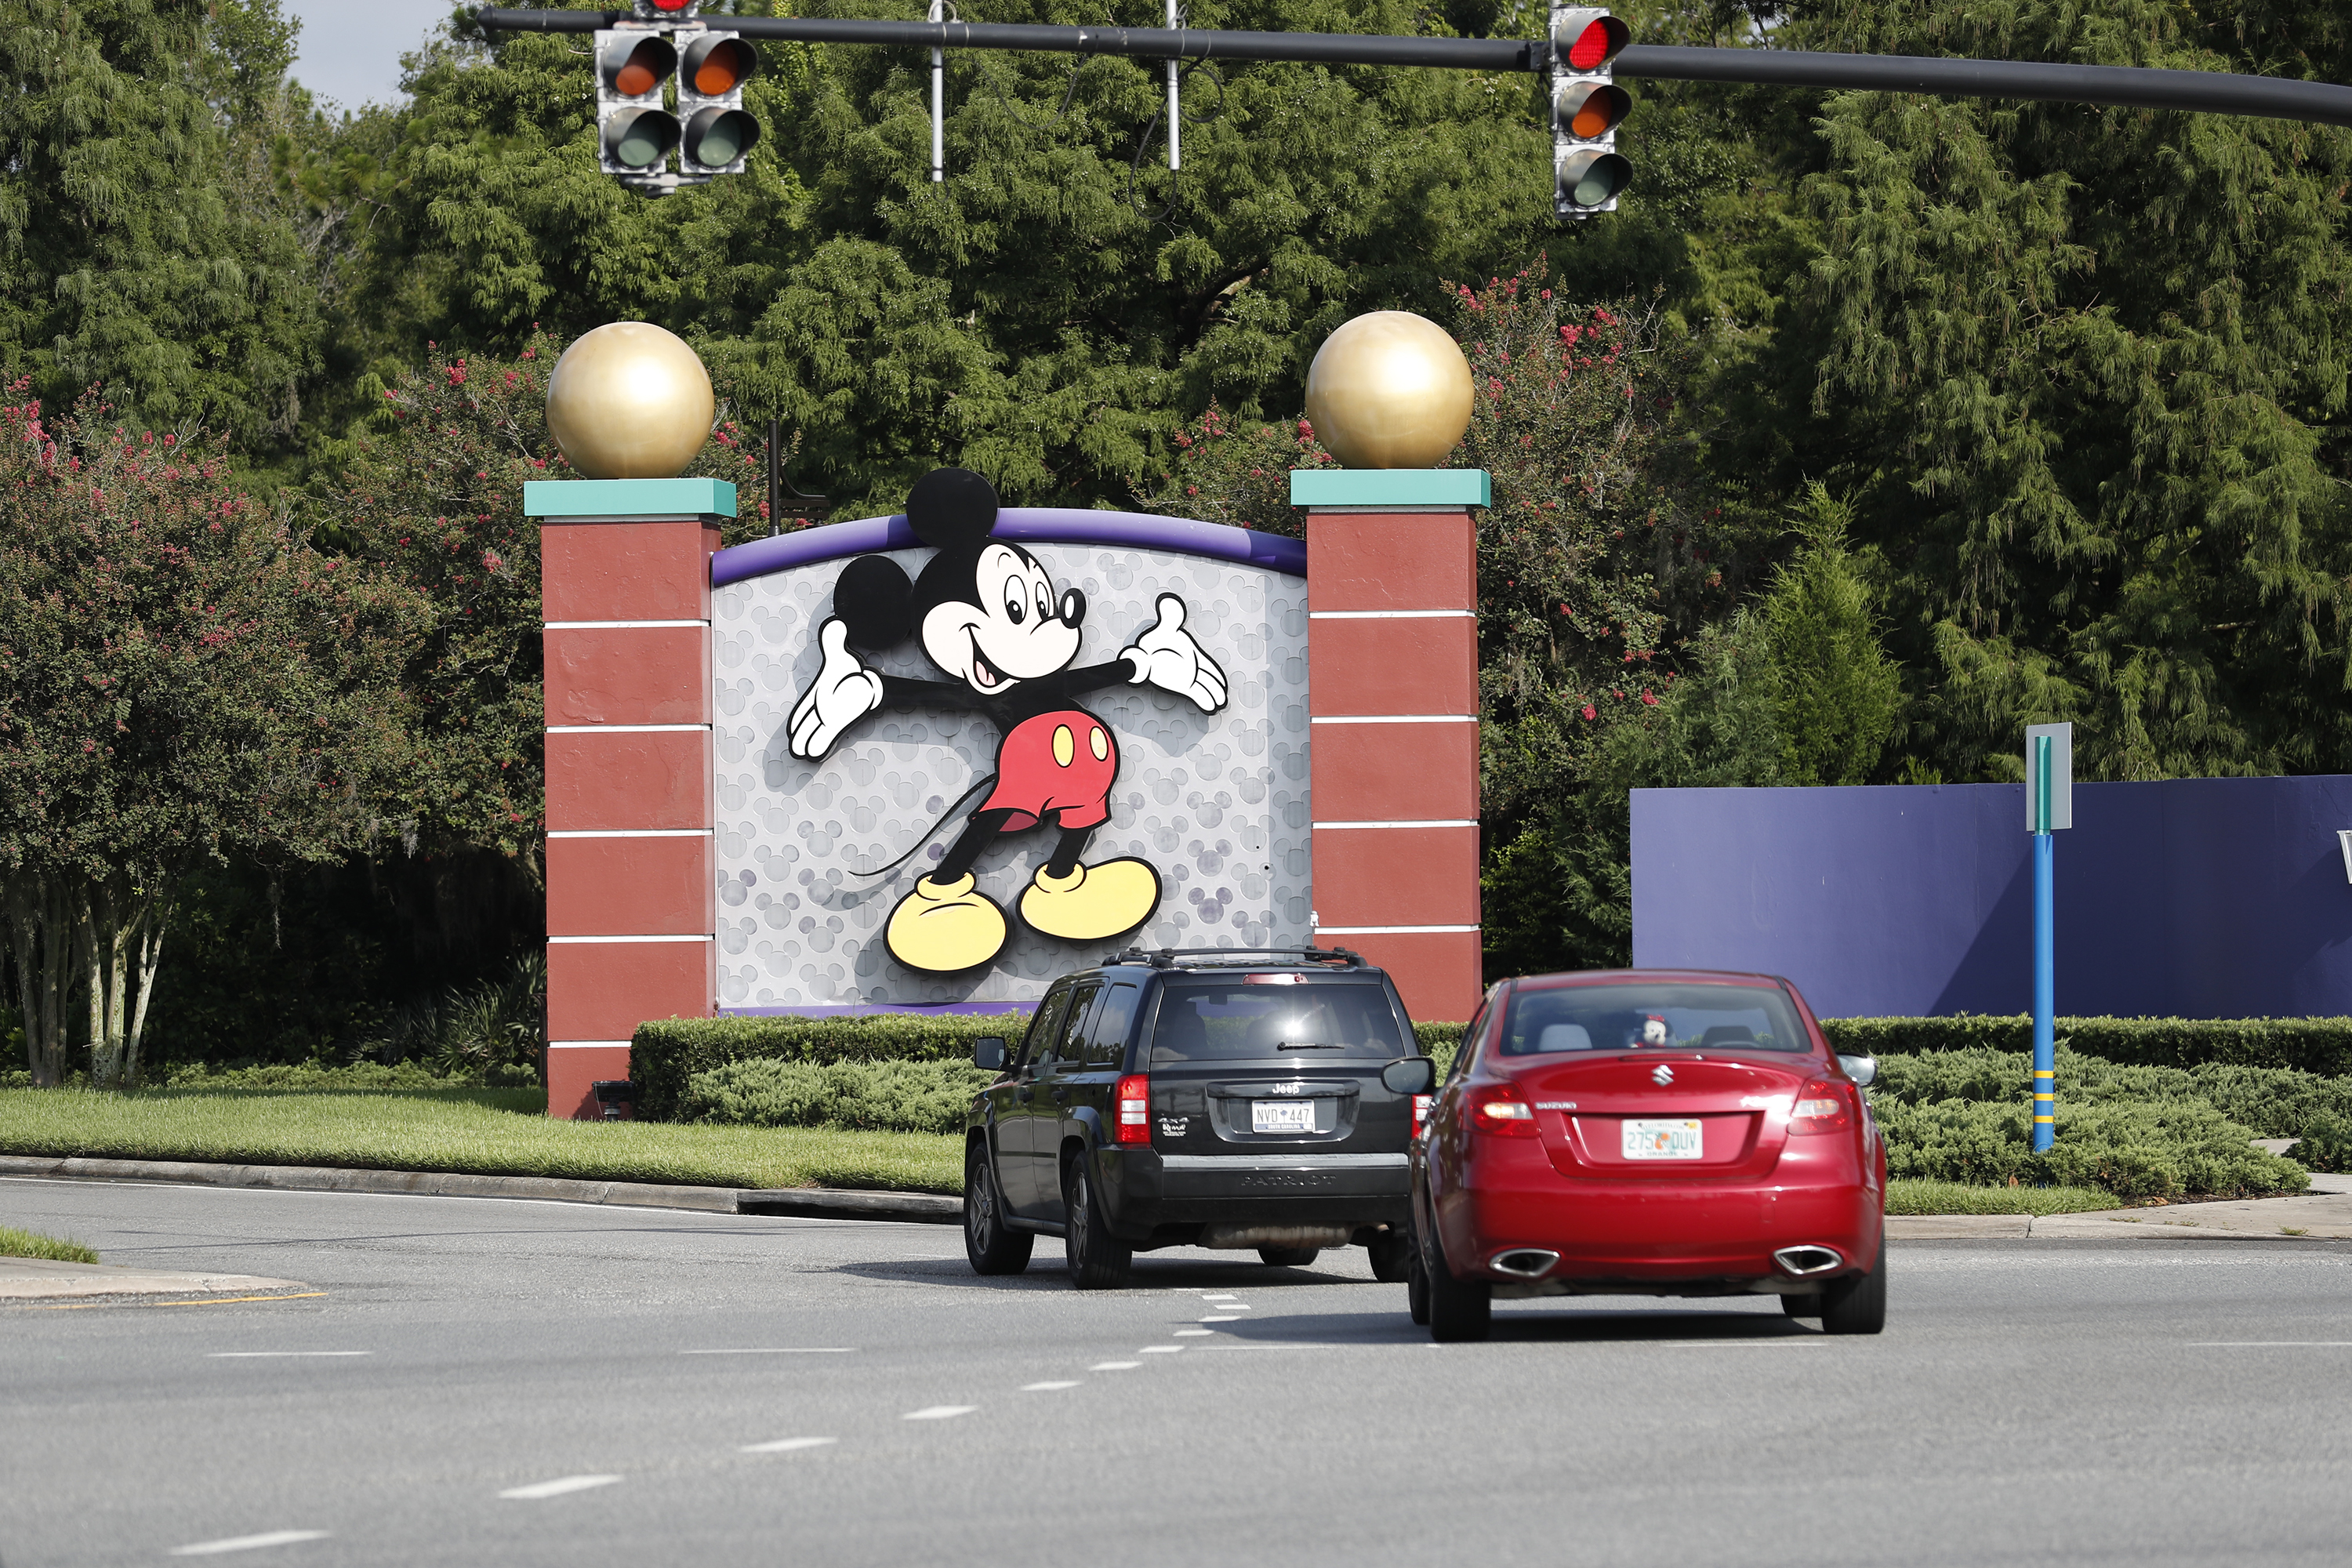 LAKE BUENA VISTA, FL - JULY 11: A view of Mickey Mouse sign at the Walt Disney World theme park entrance on July 11, 2020 in Lake Buena Vista, Florida. The theme park reopened despite a surge in new COVID-19 infections throughout Florida, including the central part of the state where Orlando is located.   Octavio Jones/Getty Images/AFP